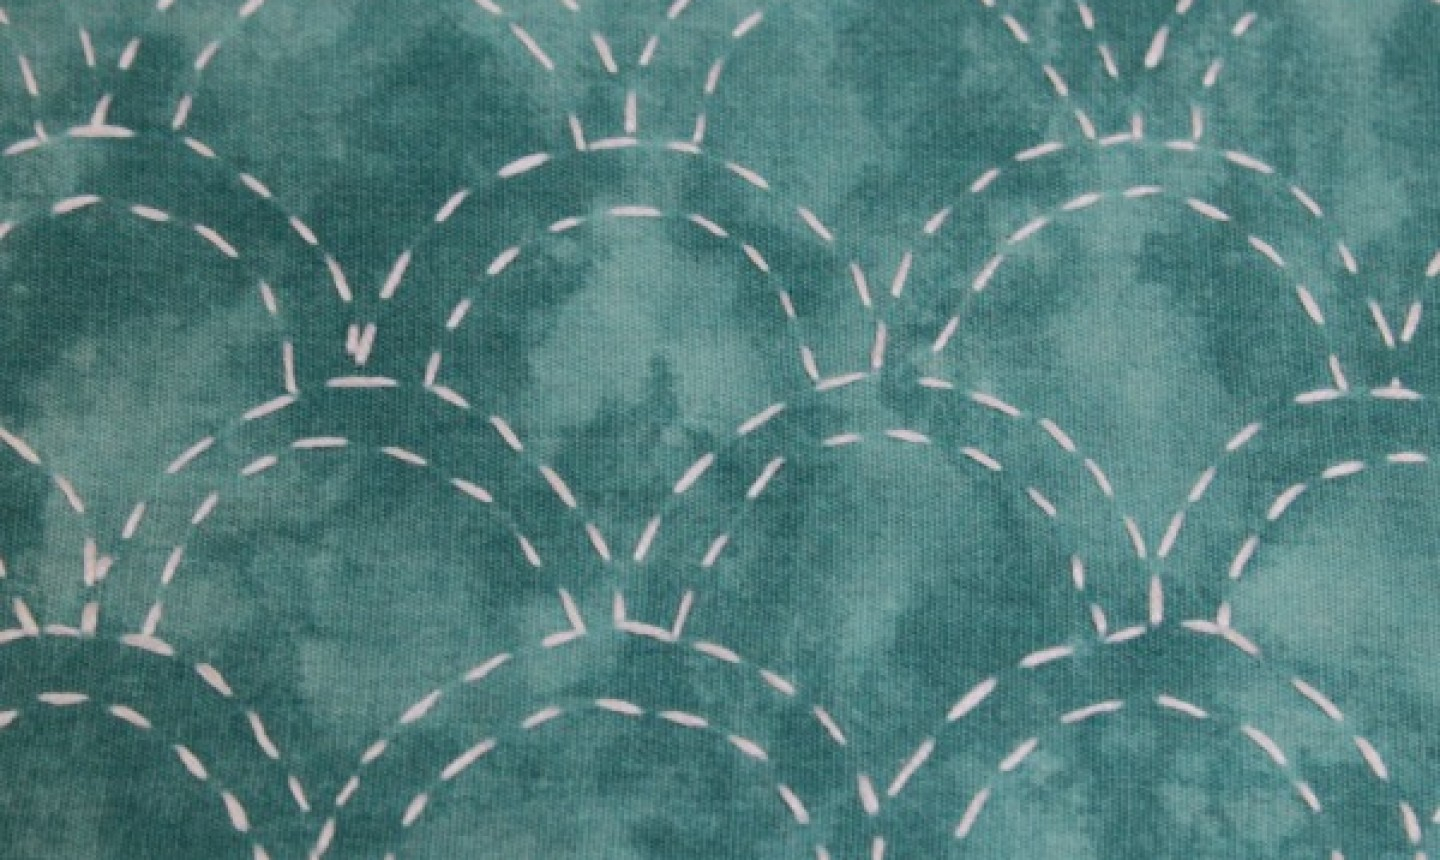 Sashiko Embroidery Patterns Learn Simple Sashiko Embroidery With This Whimsical Cloud Pattern